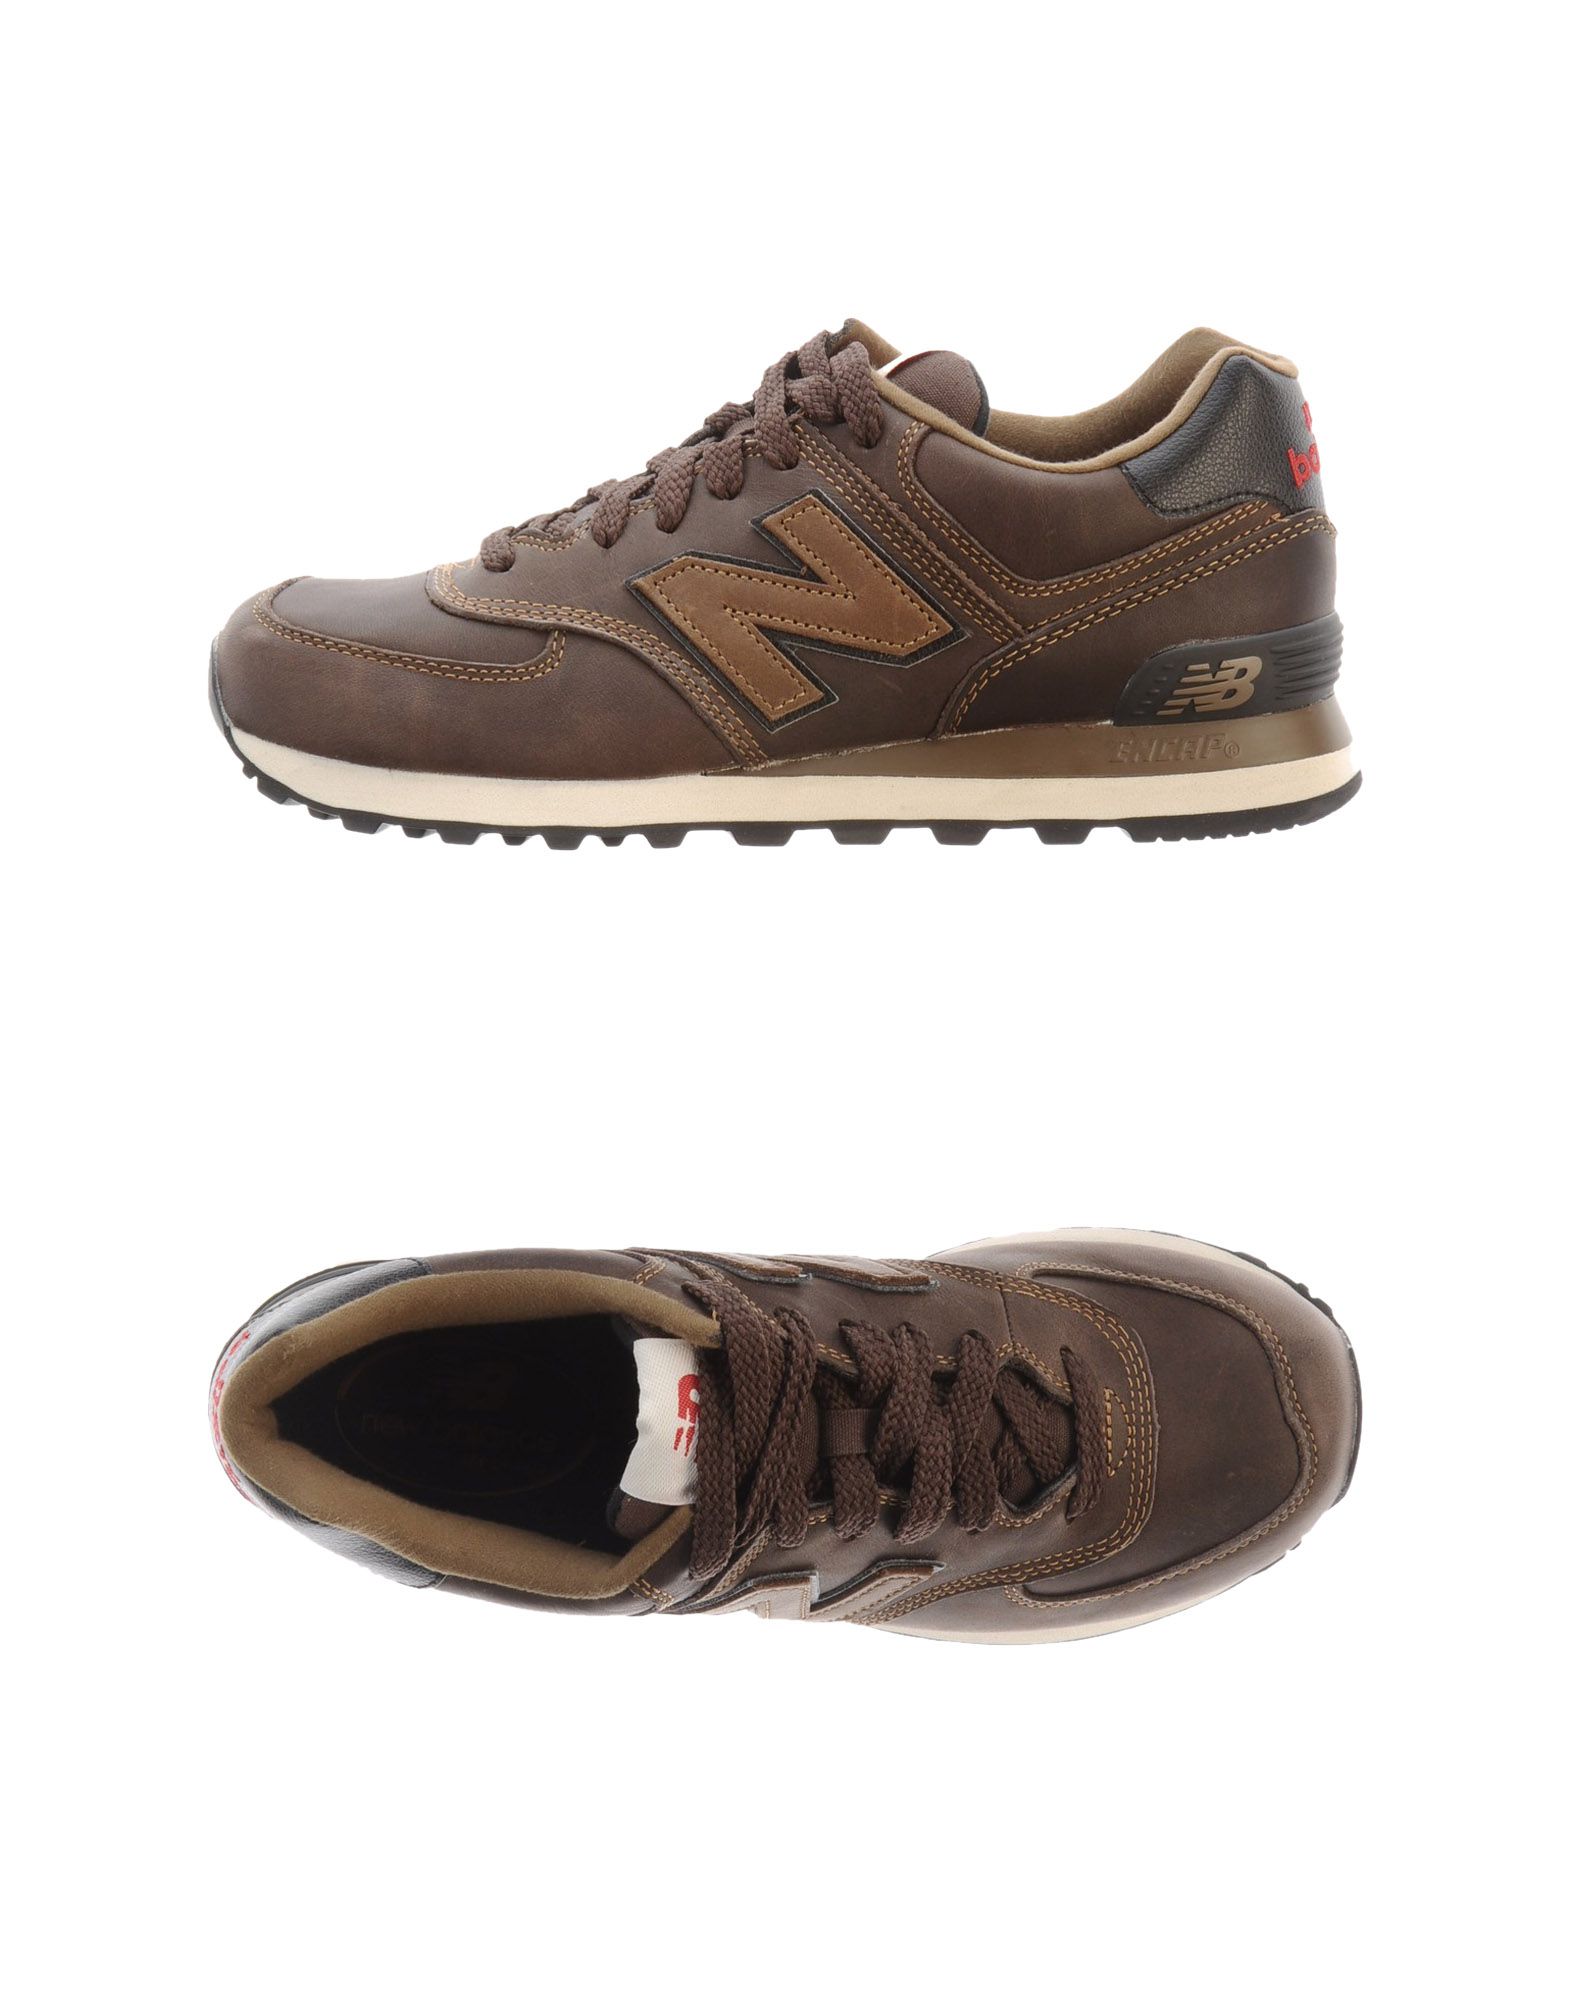 Foto New Balance Sneakers Hombre Cacao